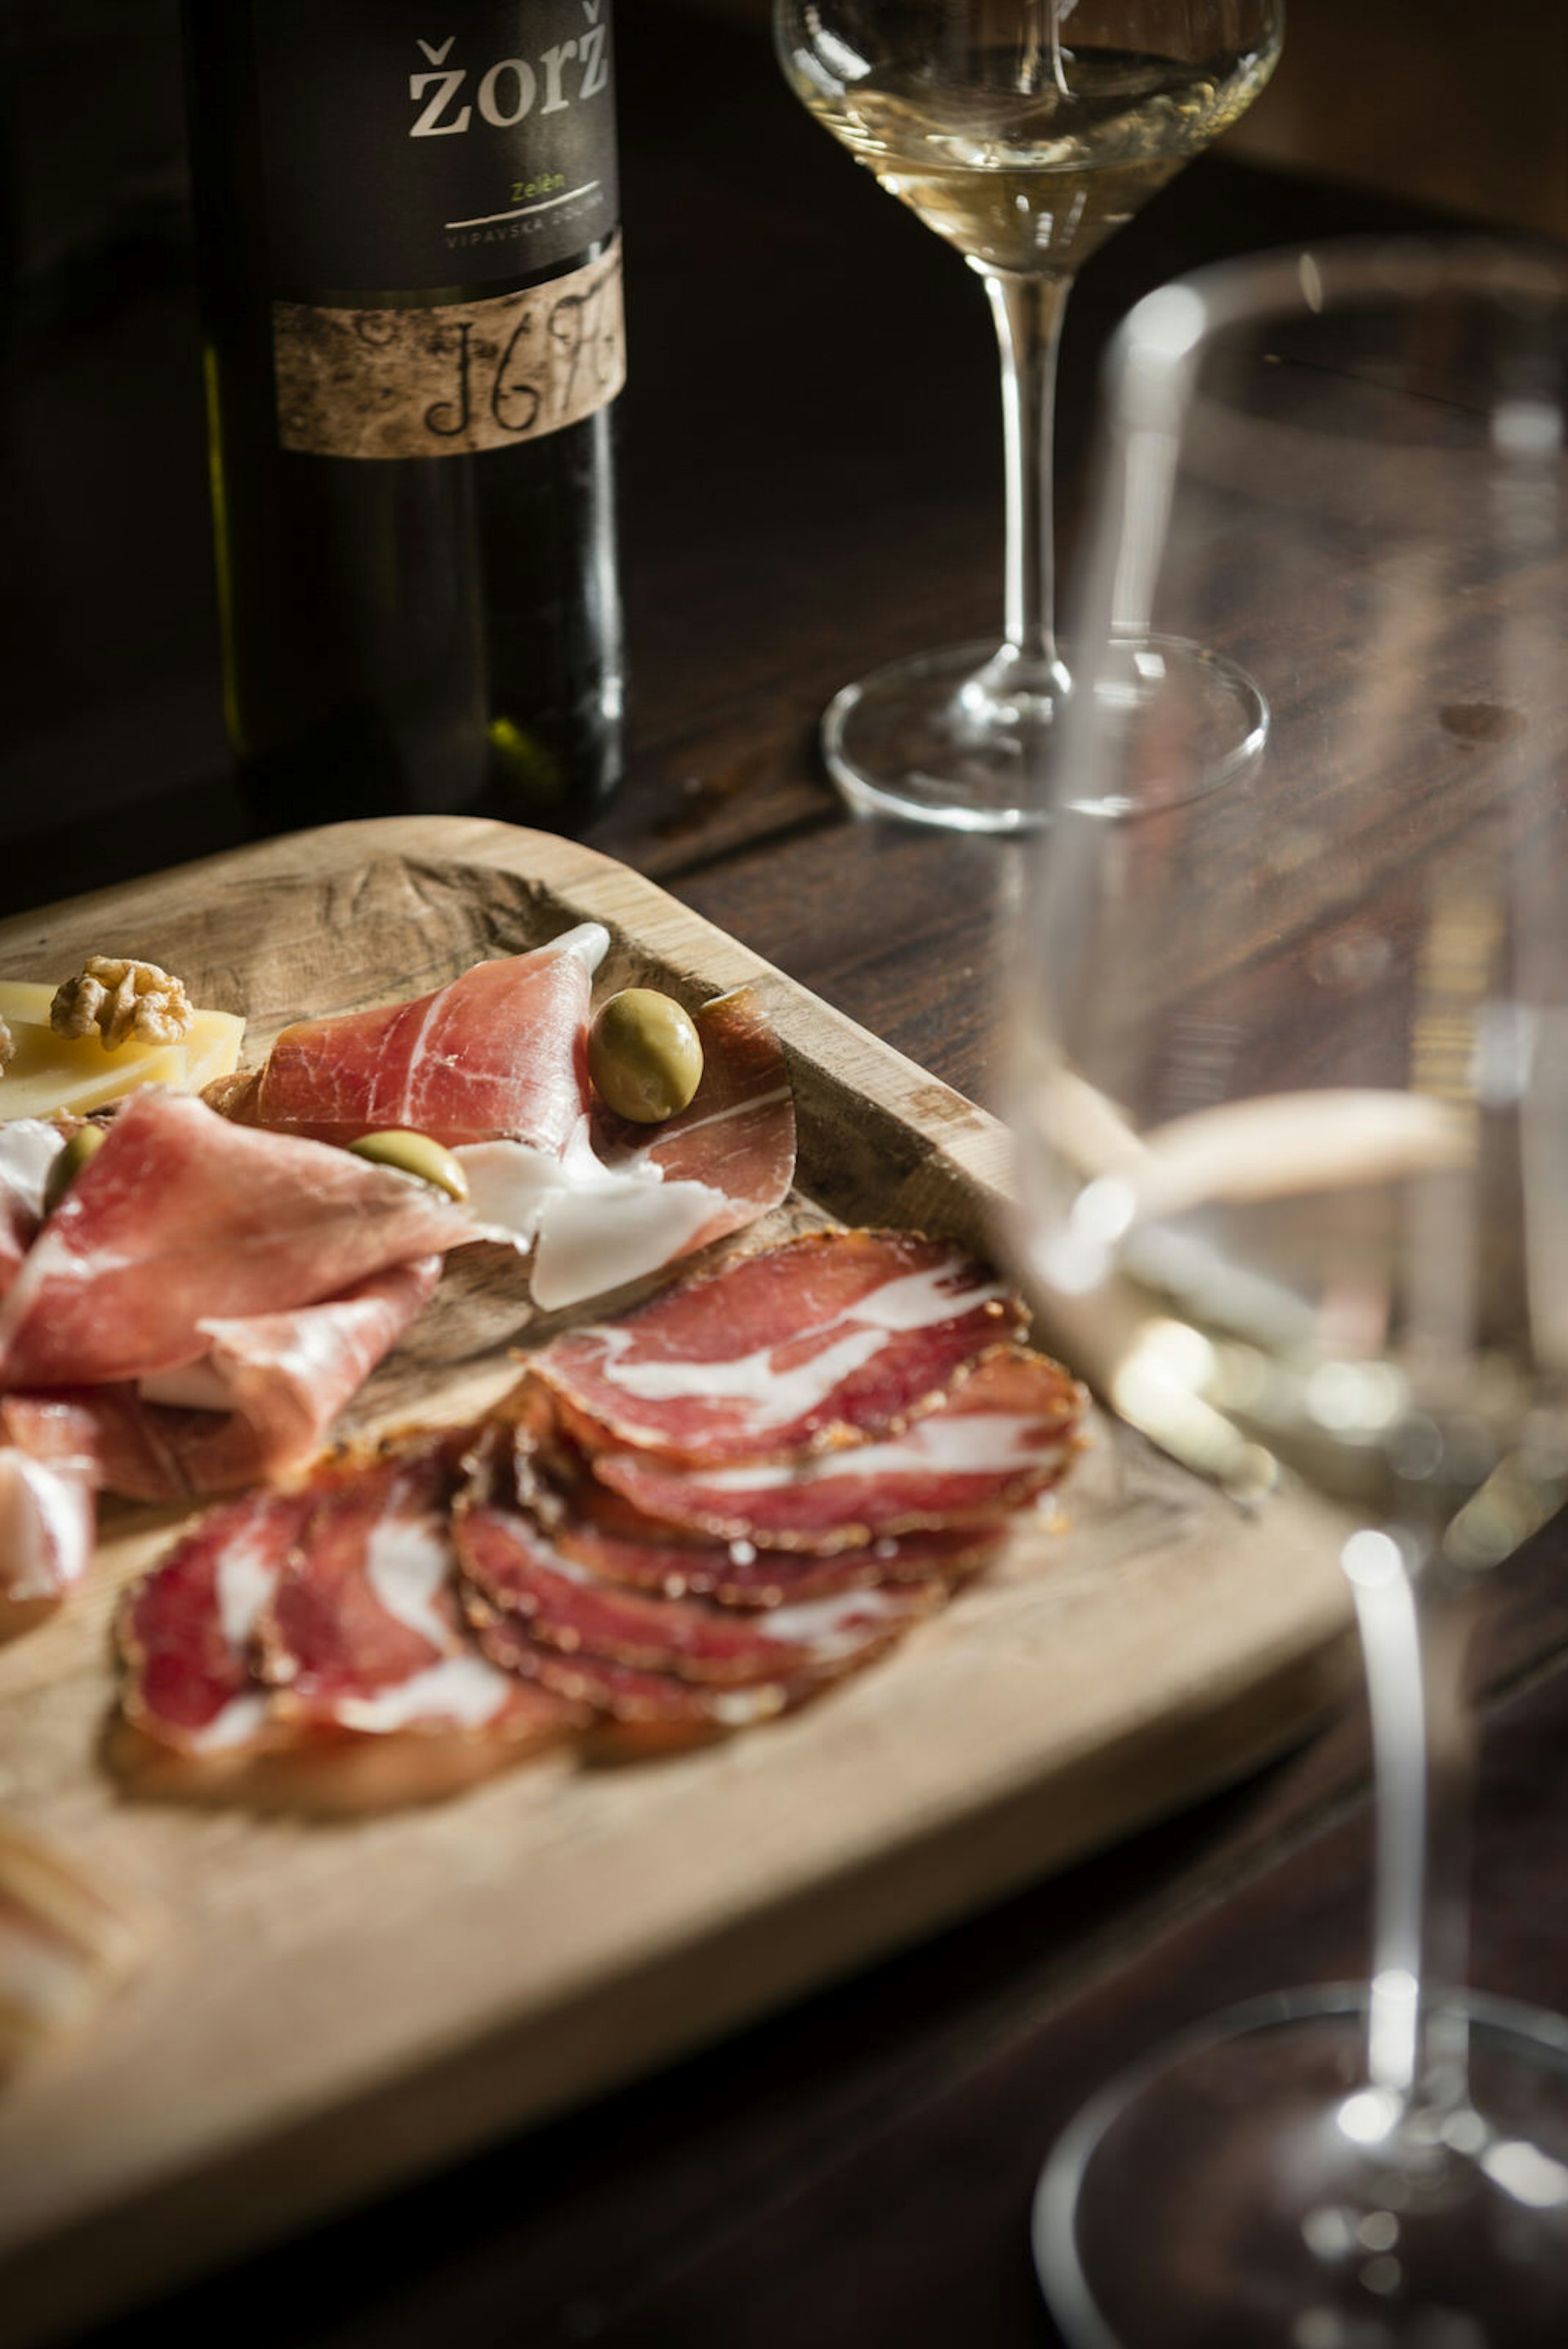 A platter of cured meats © Justin Foulkes / Lonely Planet